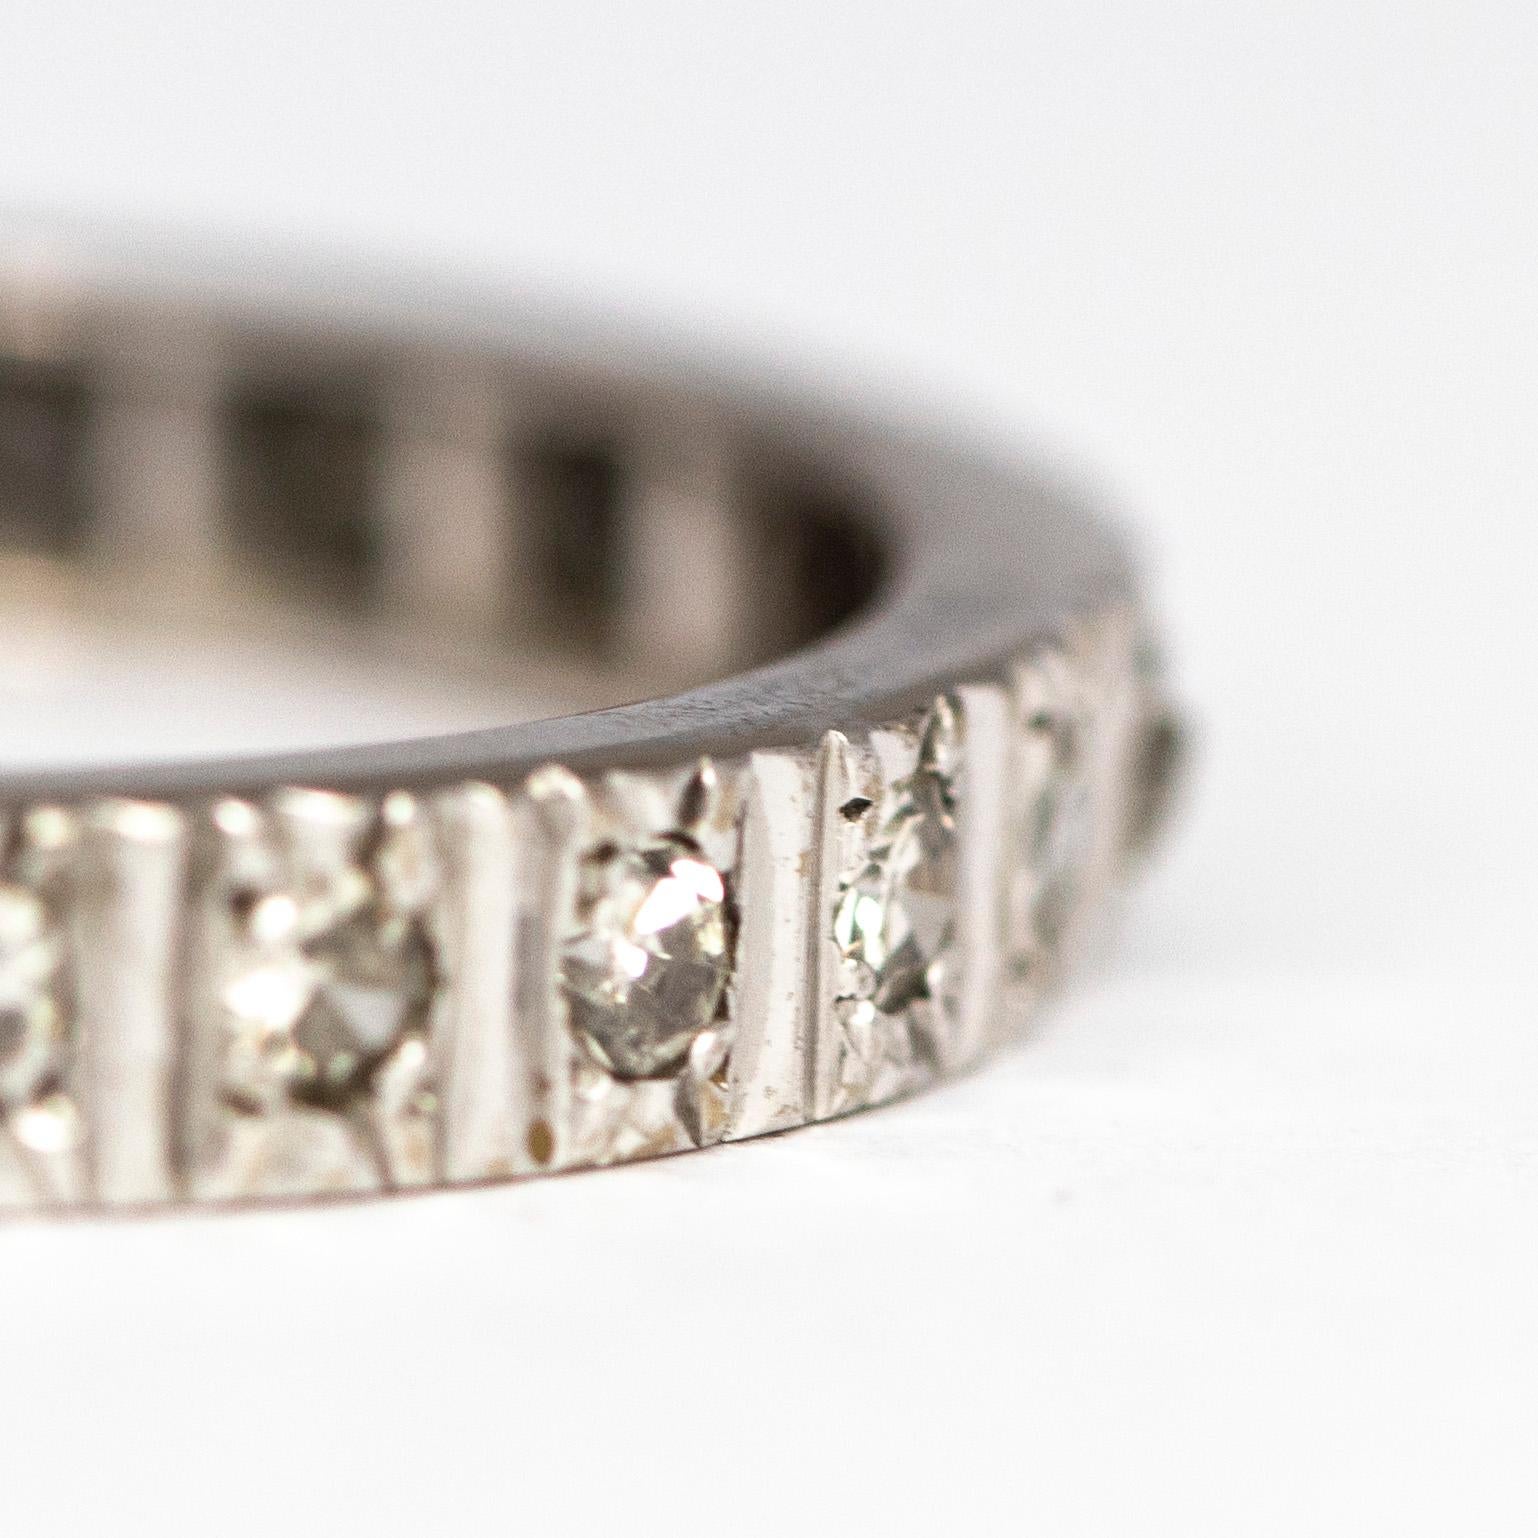 This fabulous diamond eternity band features diamonds all the way around the band. The 3pt diamonds are set in simple textured settings which sit flush in the band. 

Ring Size: S 1/2 or 9 1/2 
Band Width: 3mm 

Weight: 3.7grams 